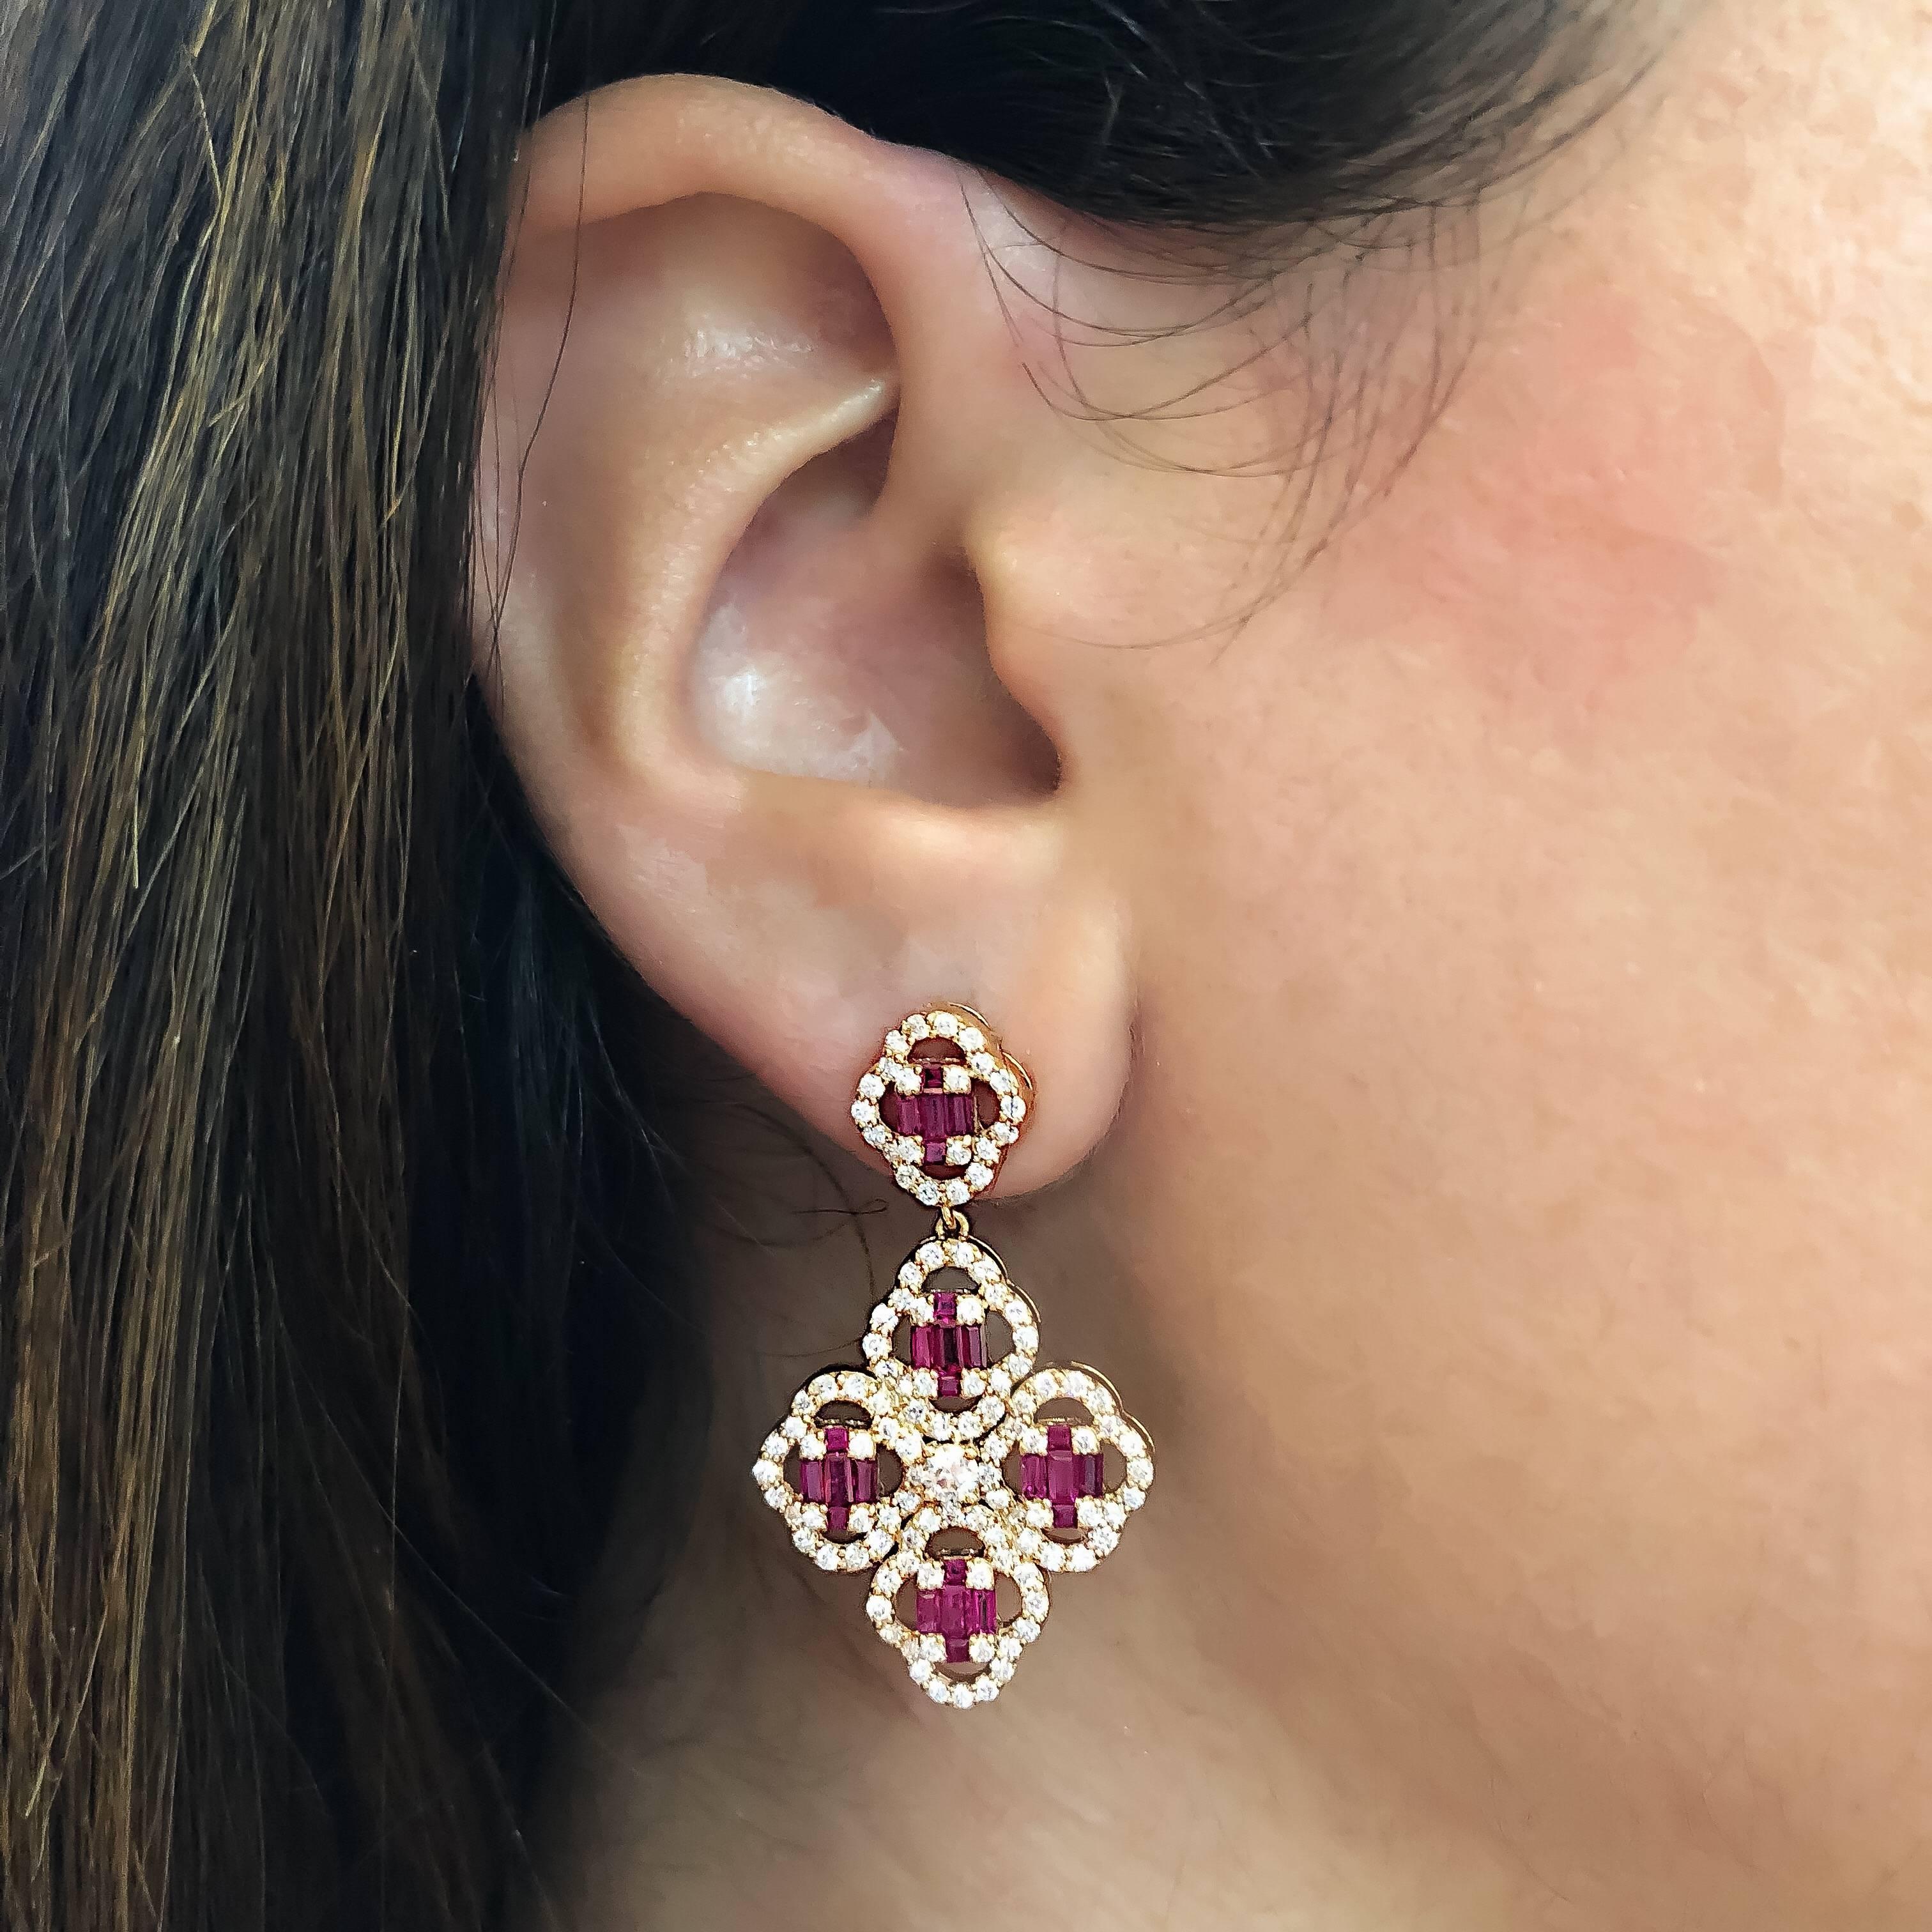 Gorgeous 18kt rose gold dangling clover push-back earrings.
Mounted with 1.89ct of white brilliant cut diamonds and 3.09ct of elongated baguette cut natural ruby gemstones.
Matching pendant necklace is available.